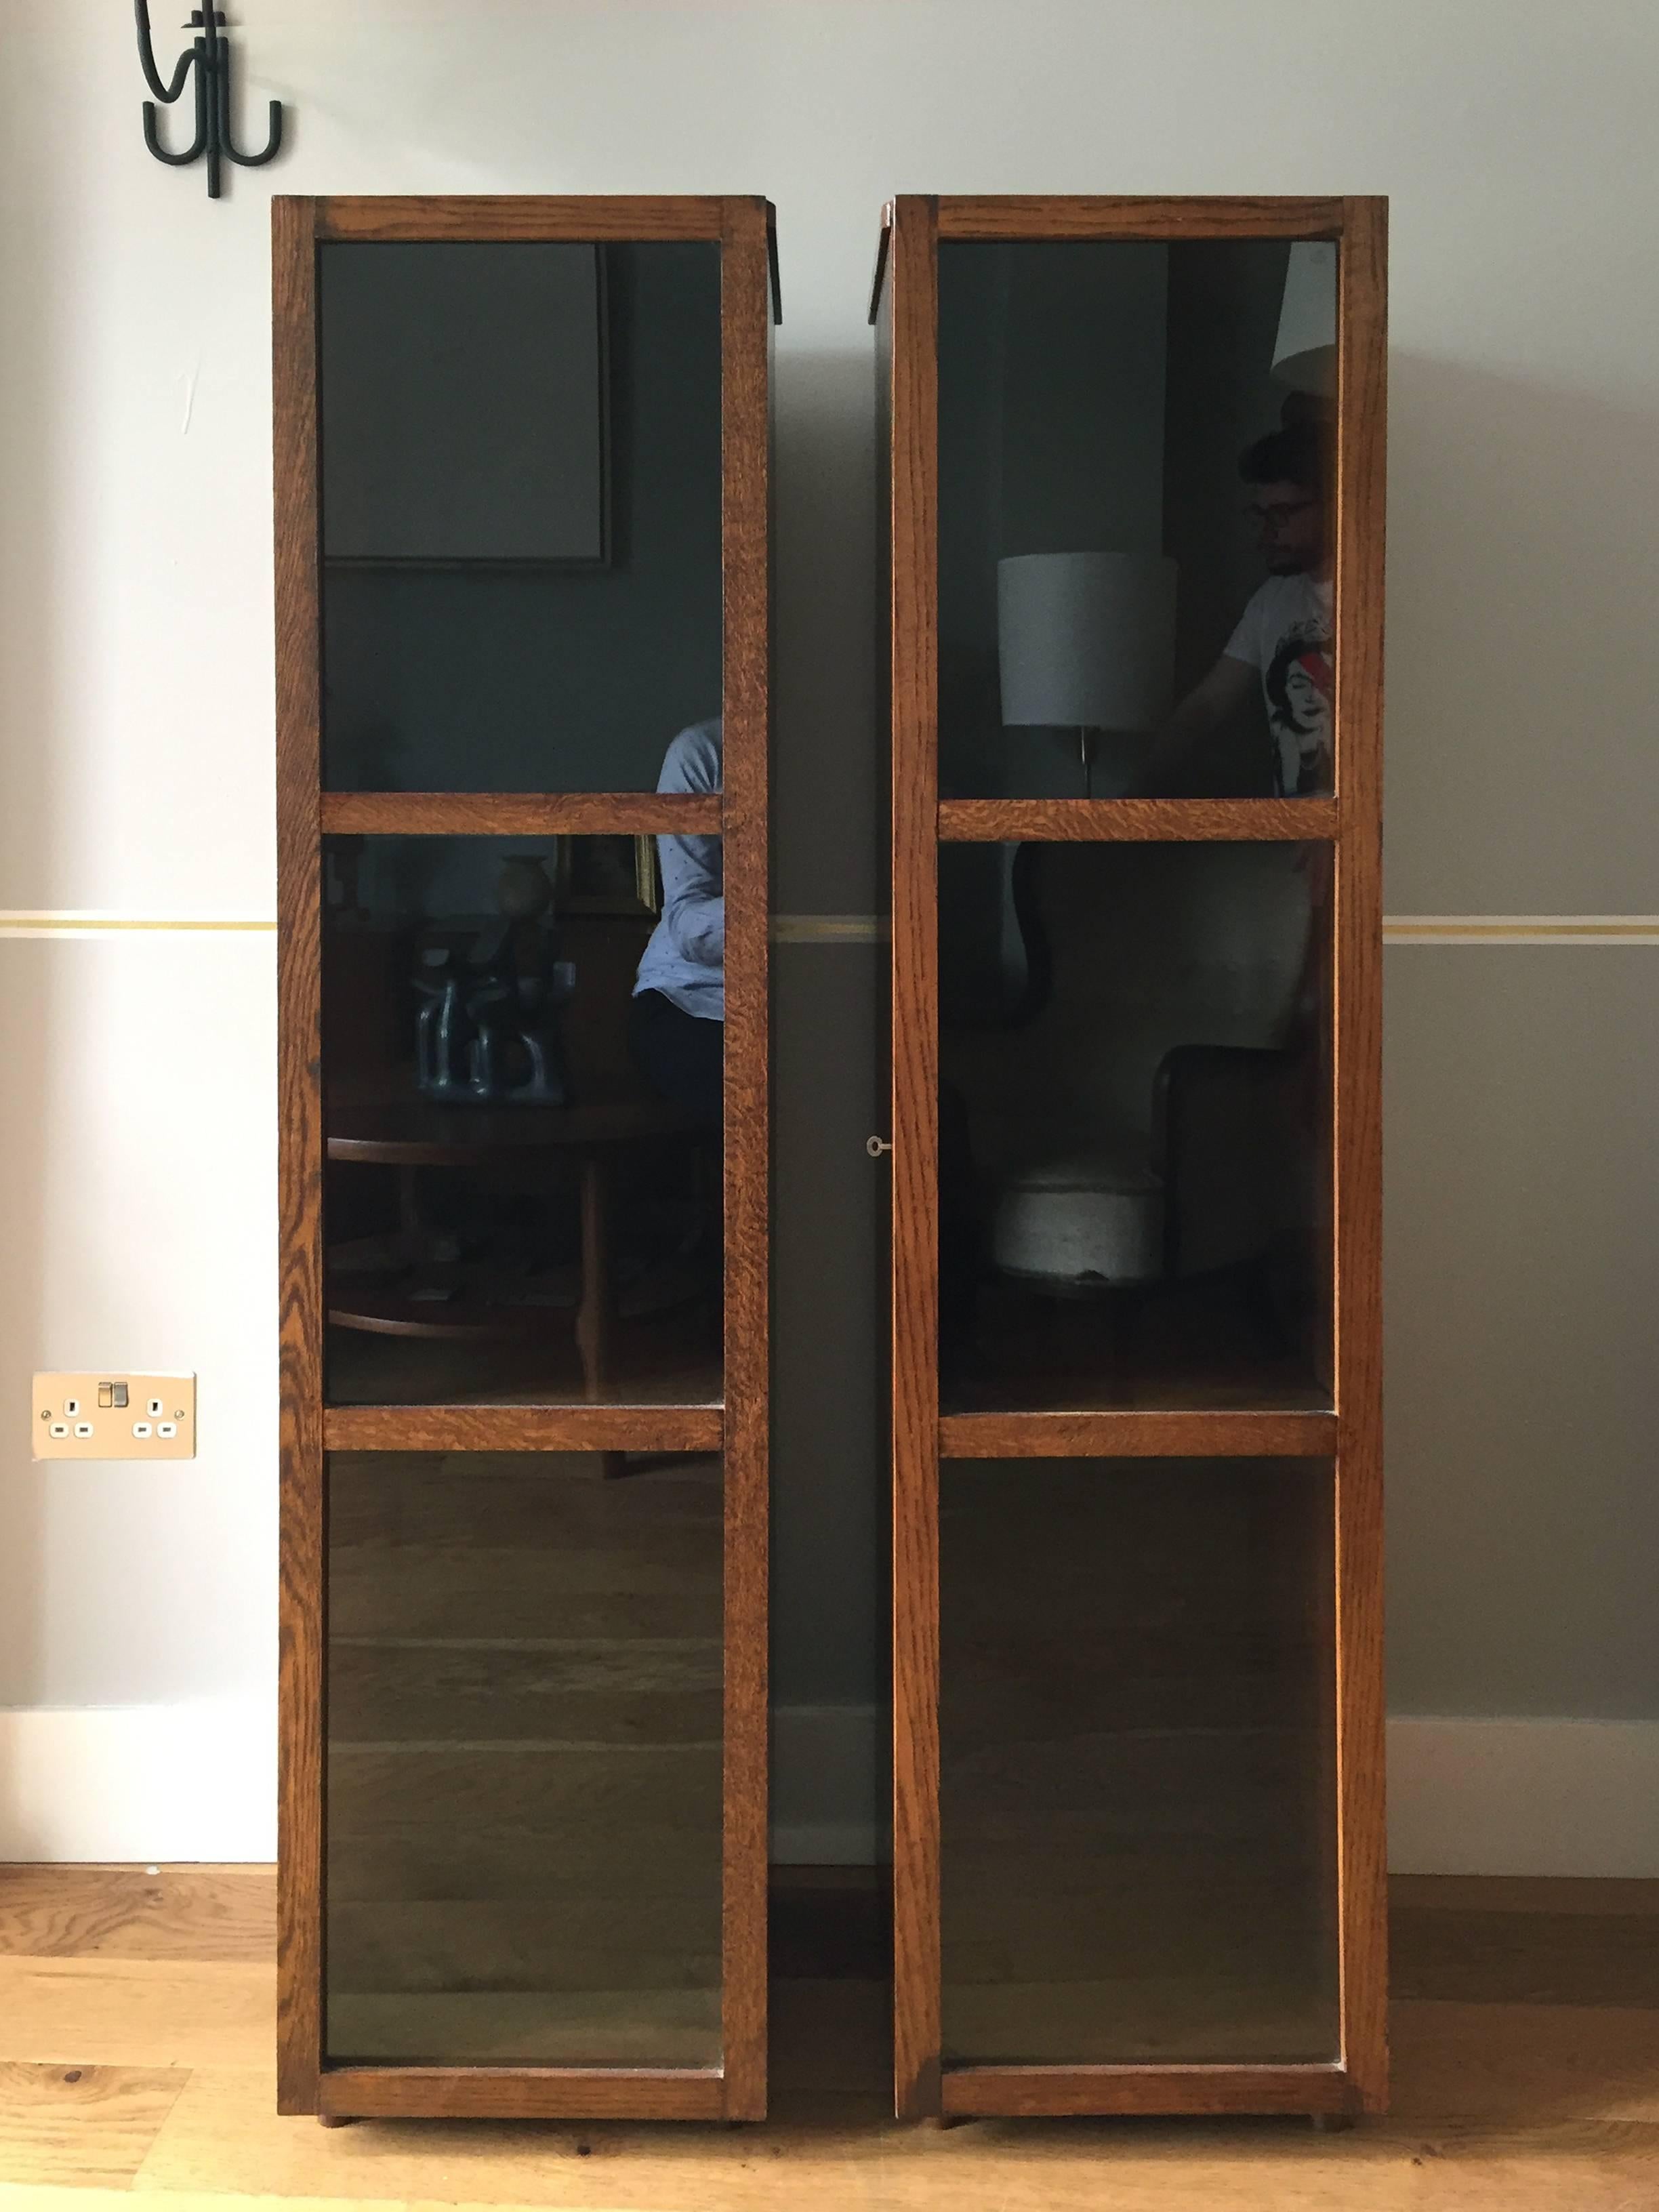 British Pair of 1940s Oak Narrow Bookcases or Display Cabinets